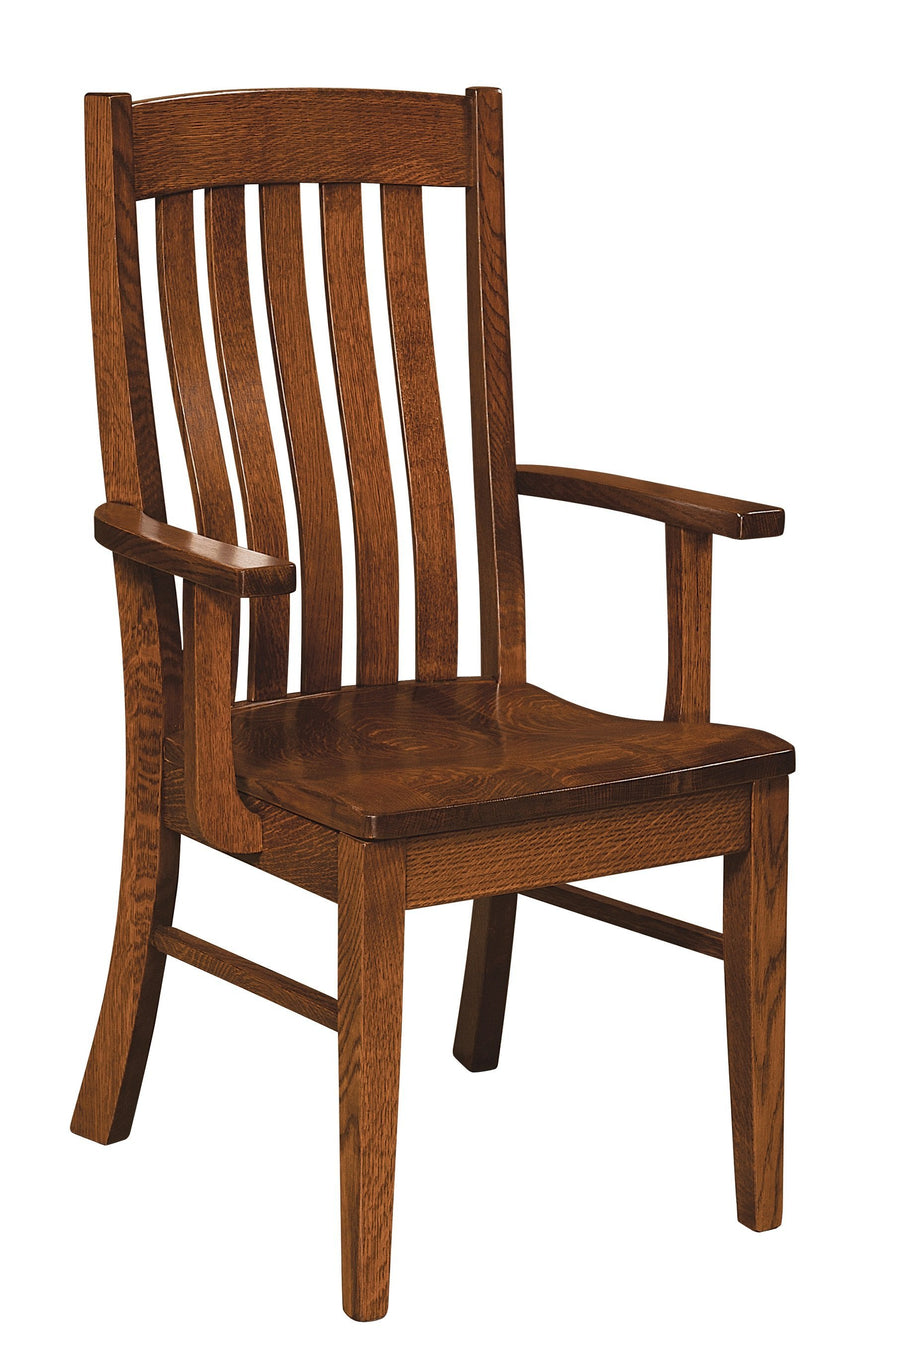 Houghton Amish Arm Chair